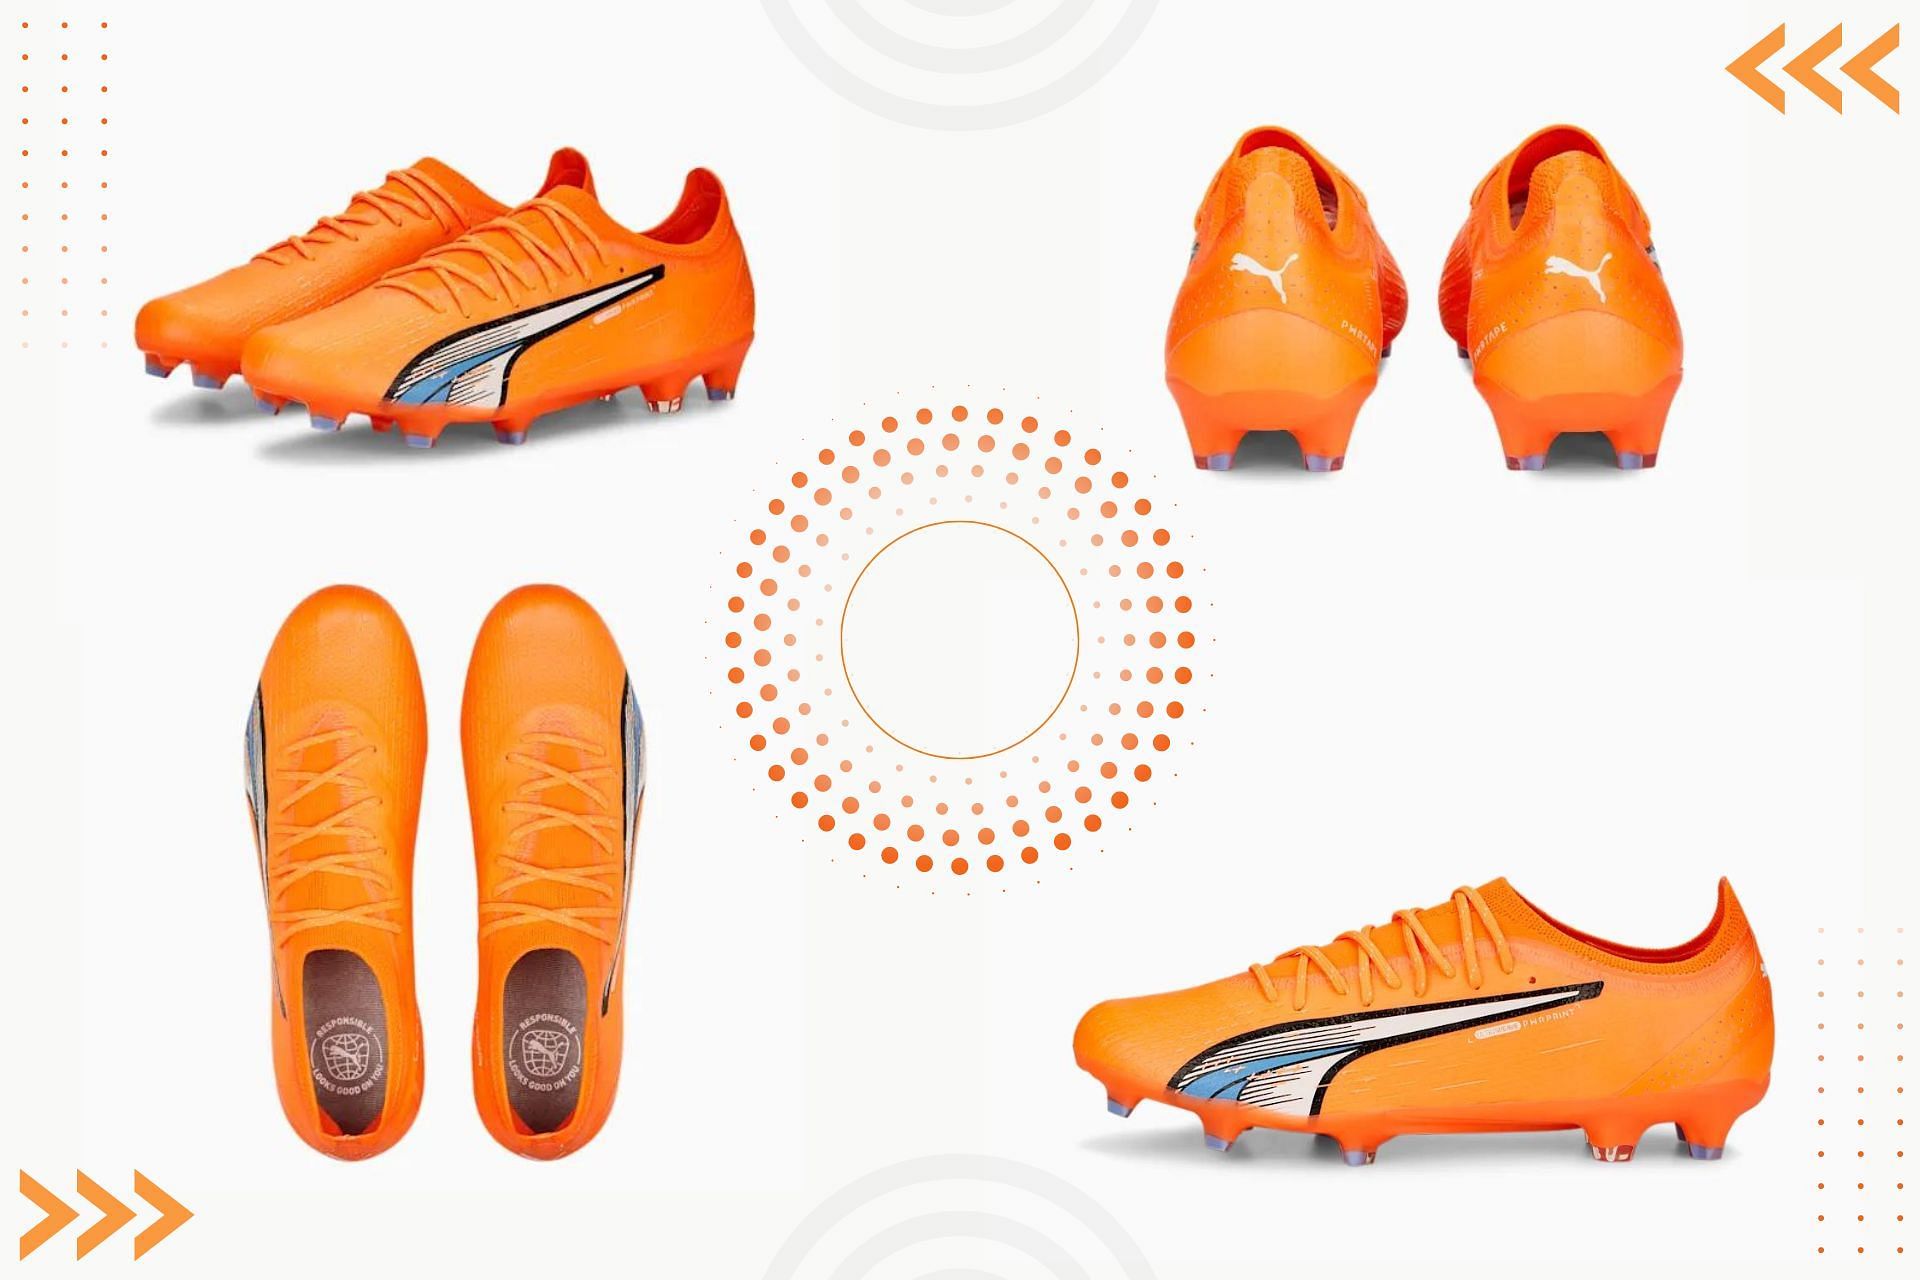 The newly released Puma Ultra Ultimate Supercharge football boot is given a redesigned soleplate for explosive speed (Image via Sportskeeda)